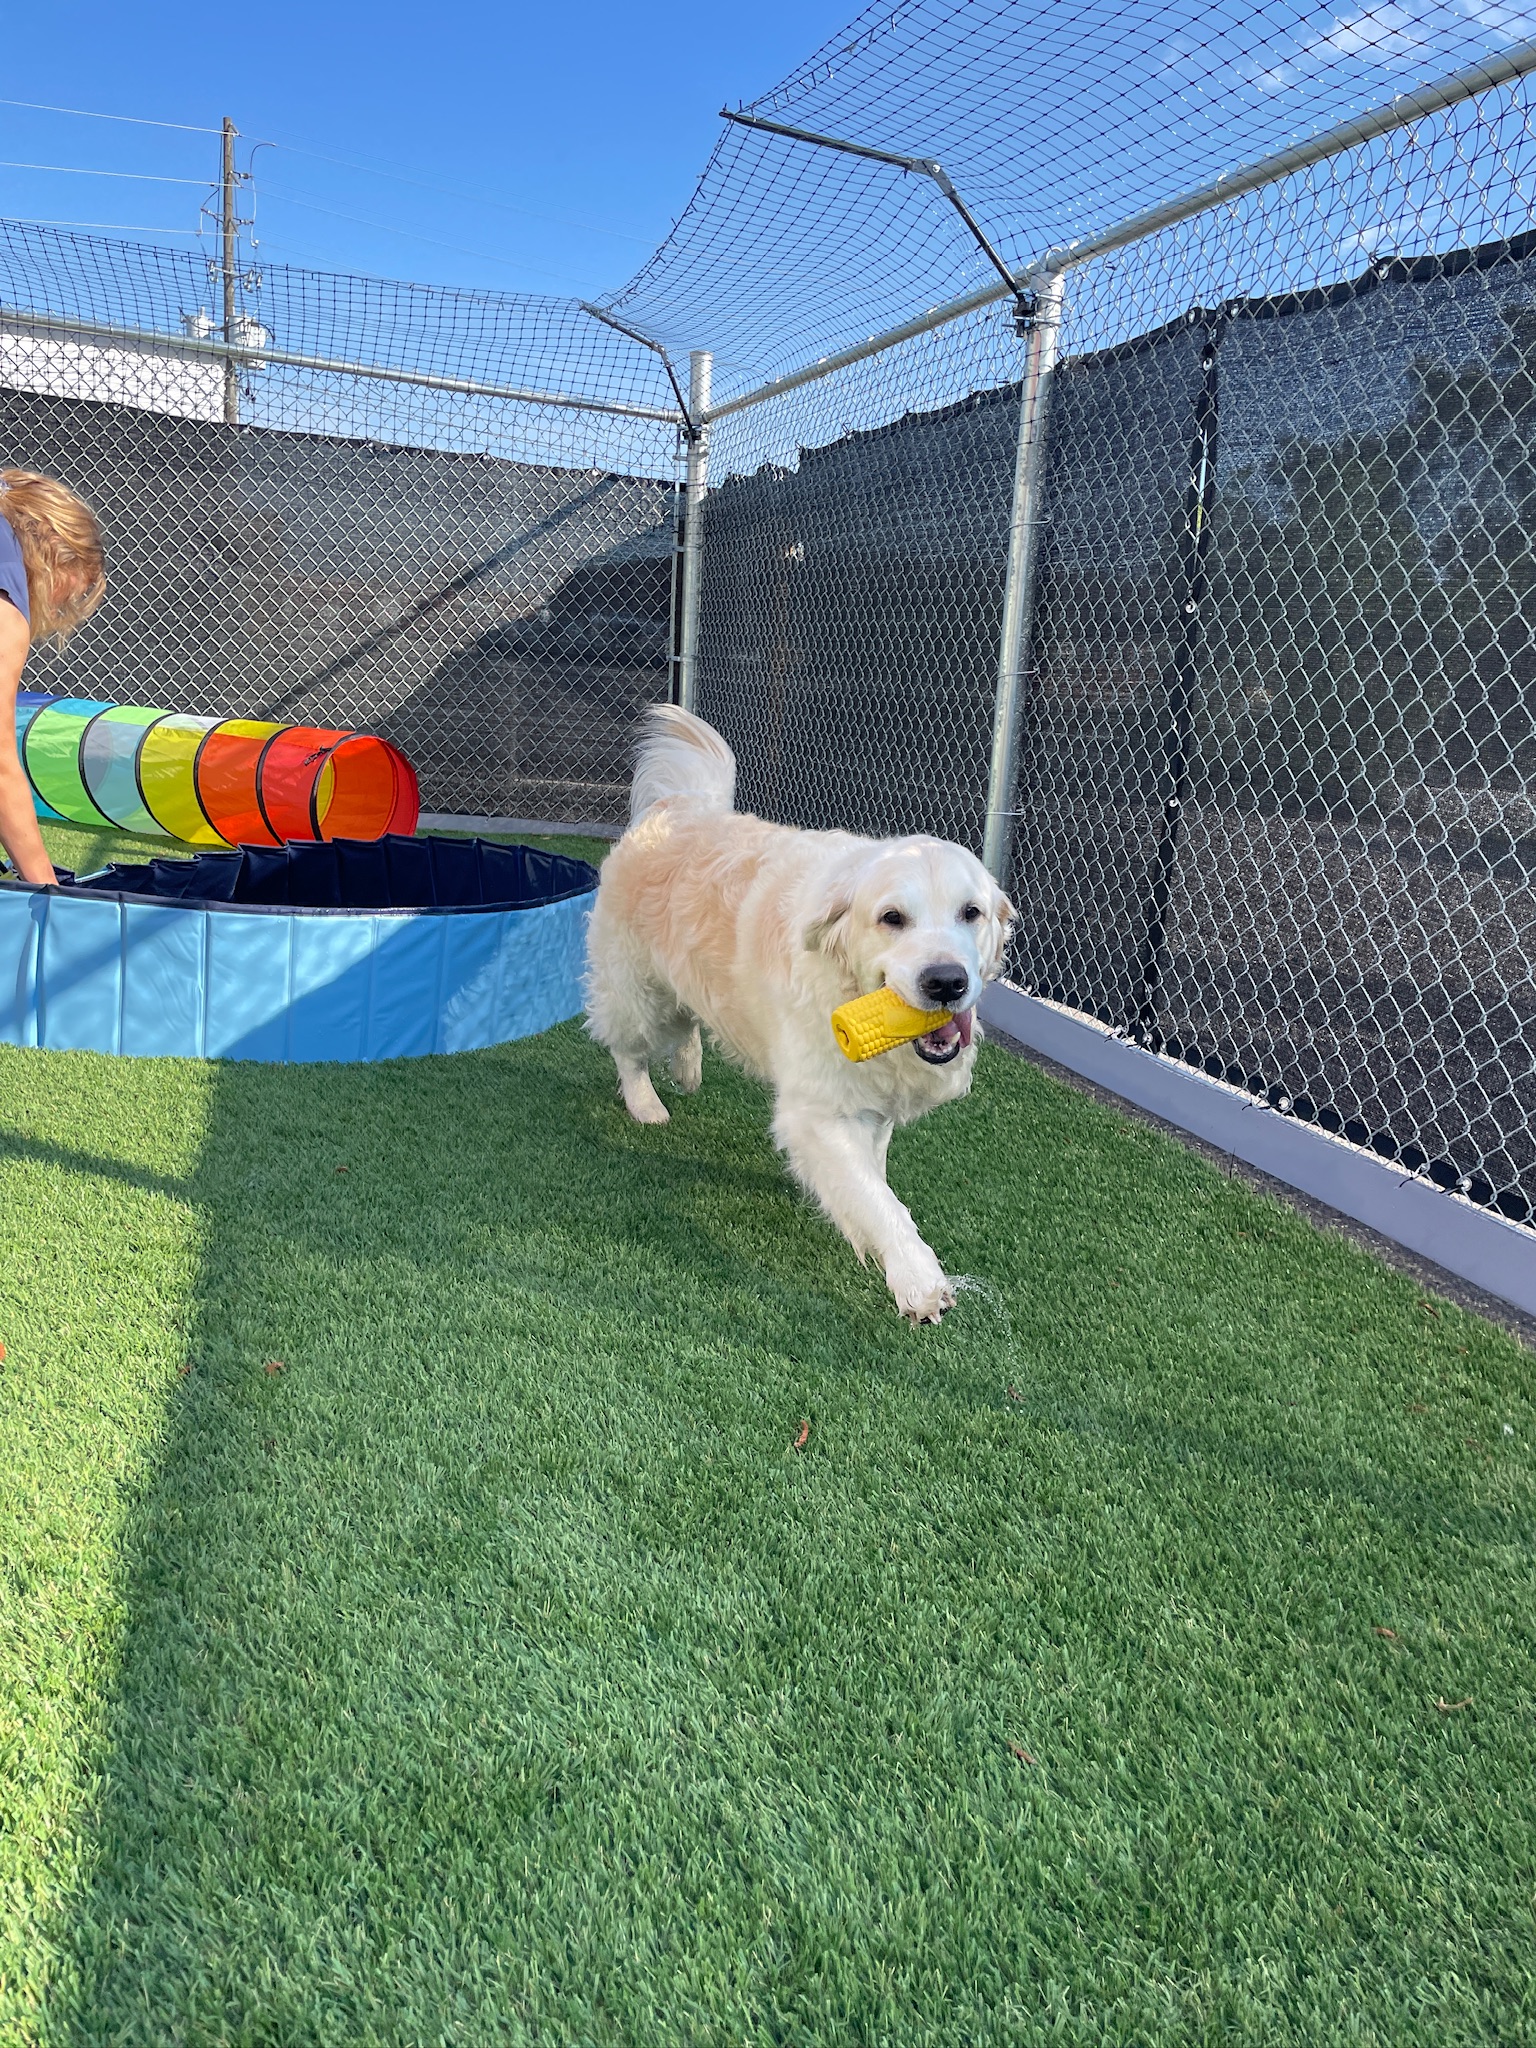 A playful dog running around outdoor space with a toy.